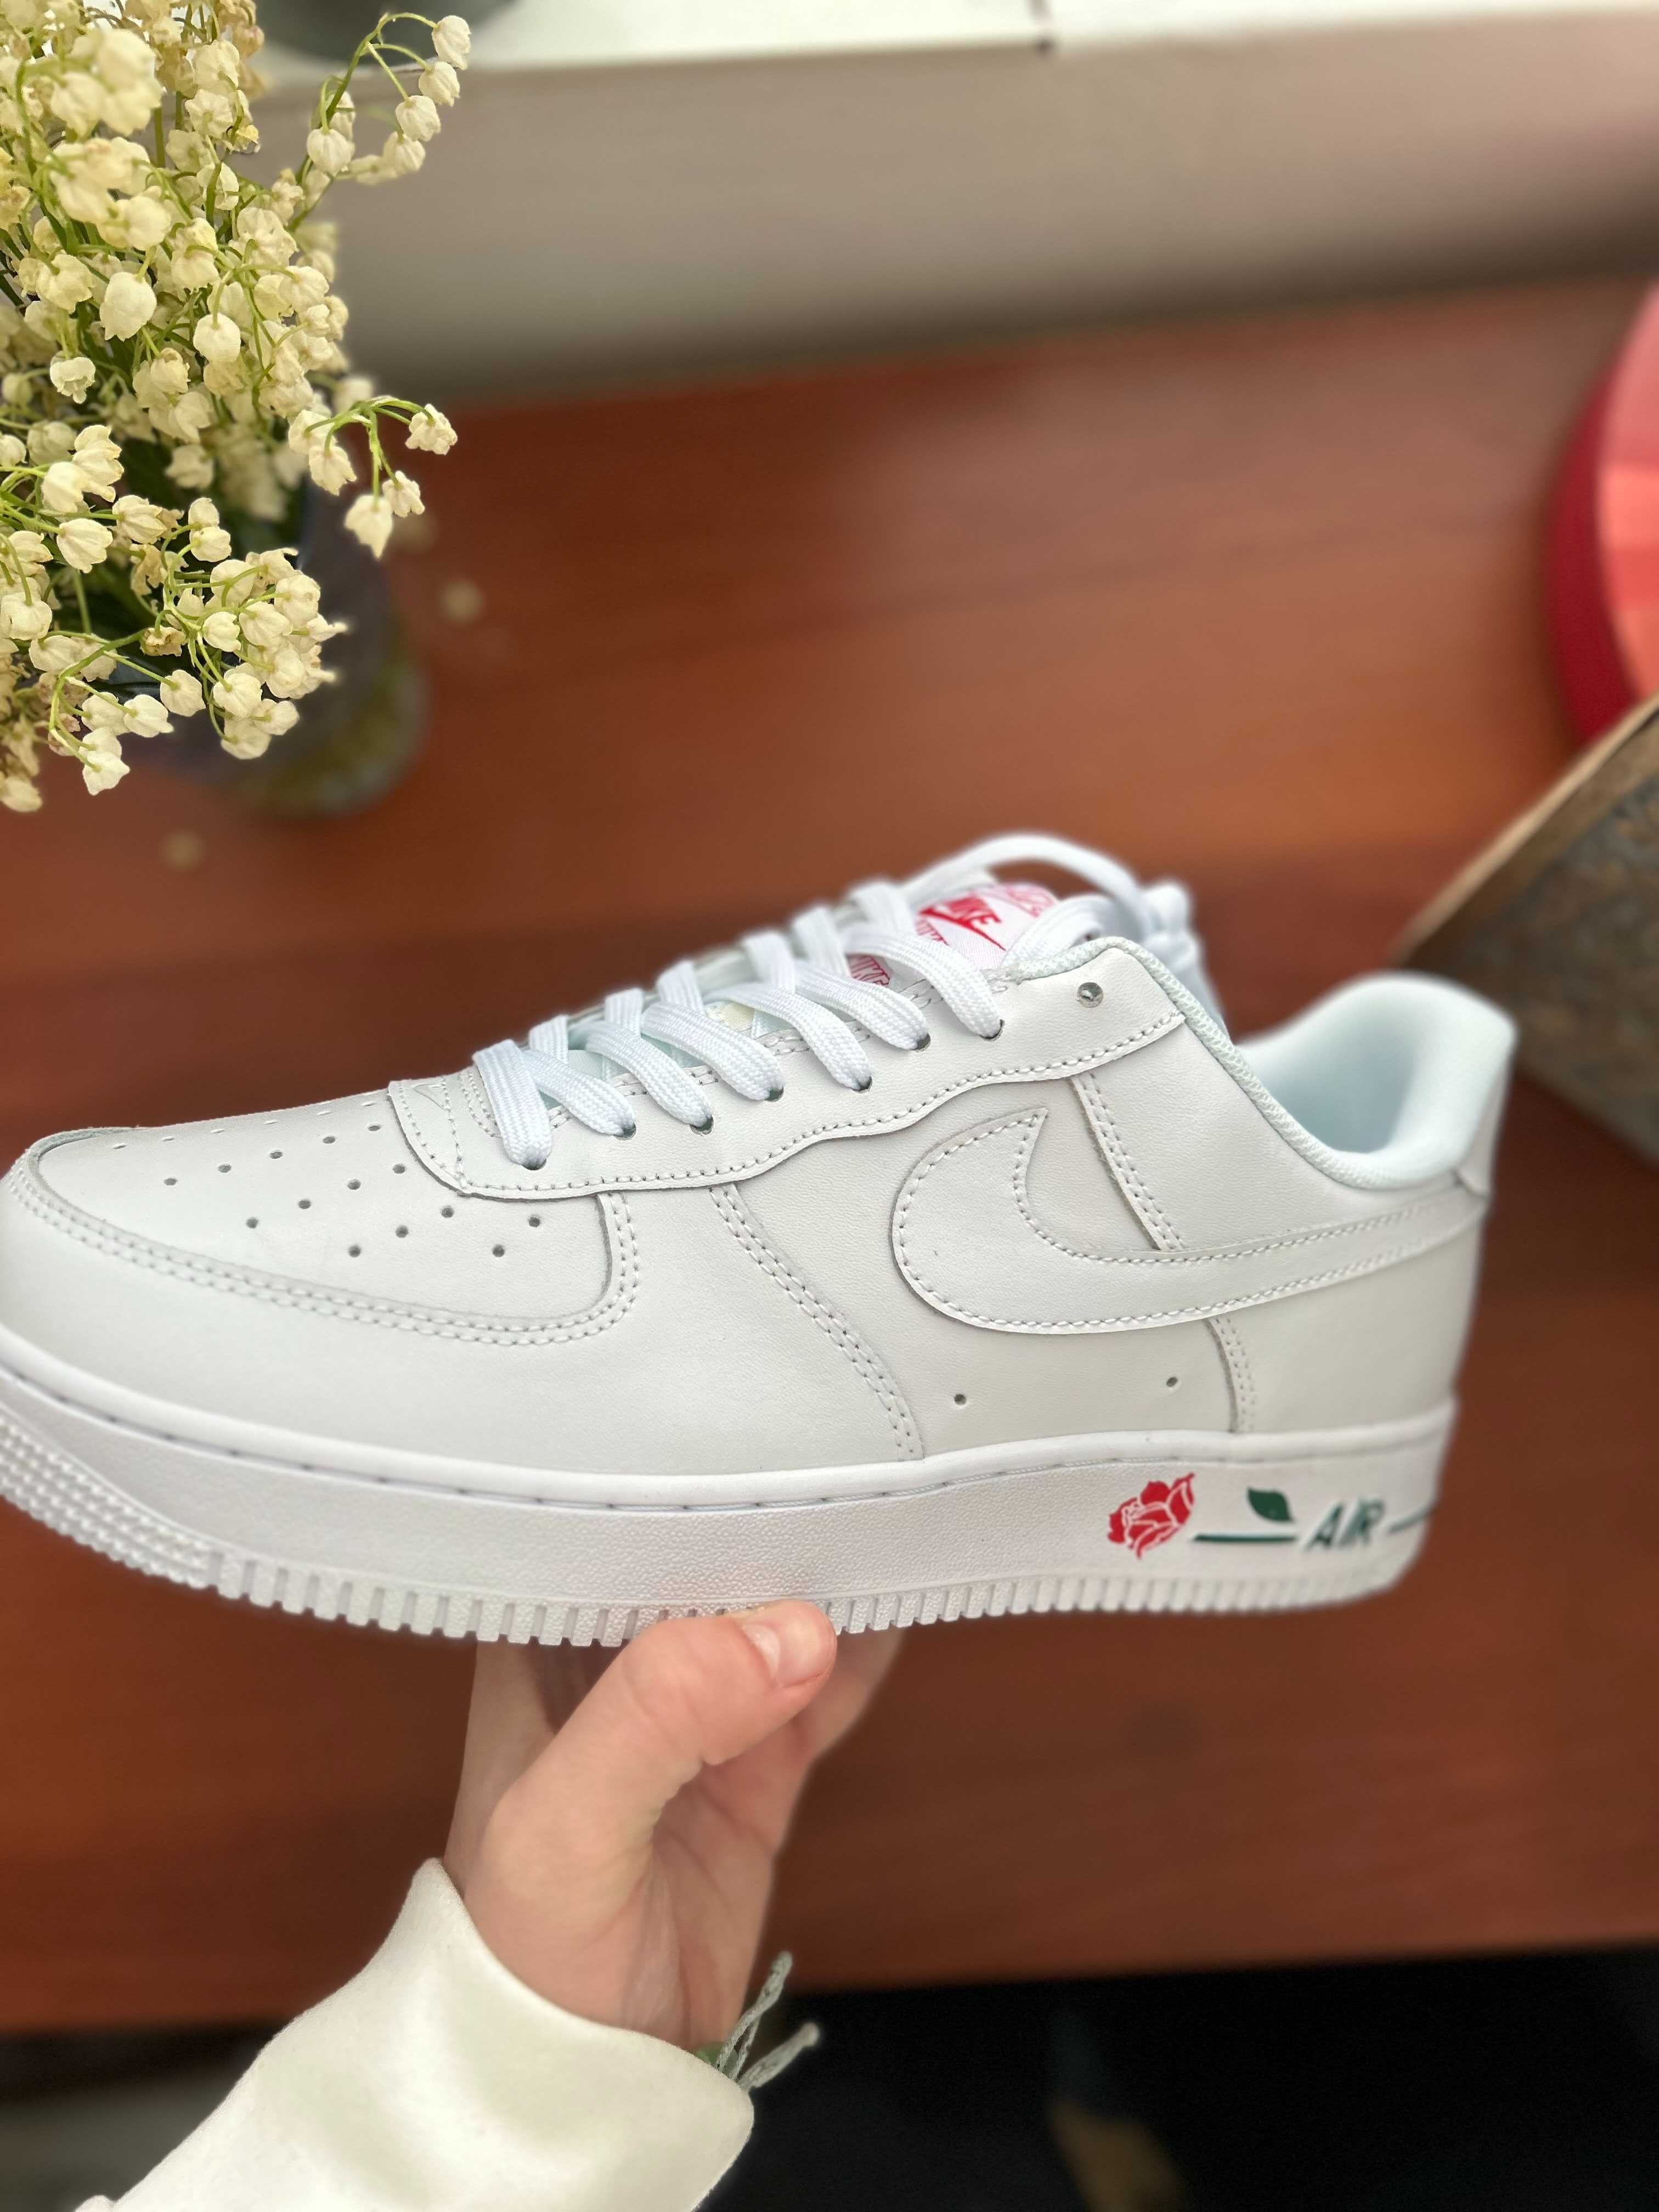 Nike Air Force 1 Low '07 "Thank You Plastic Bag" / 42